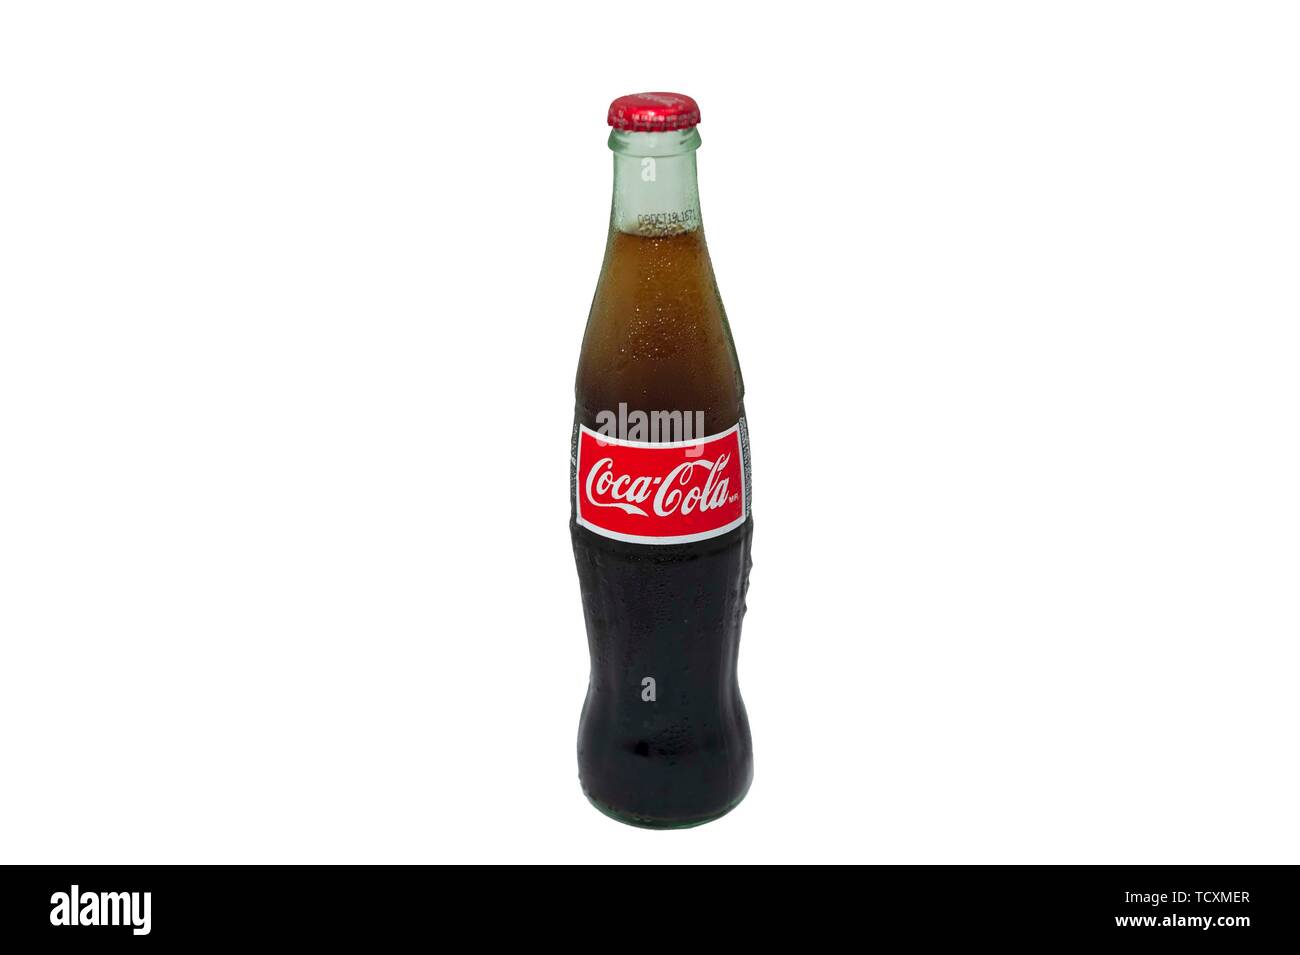 Coca cola bottle Cut Out Stock Images & Pictures - Alamy